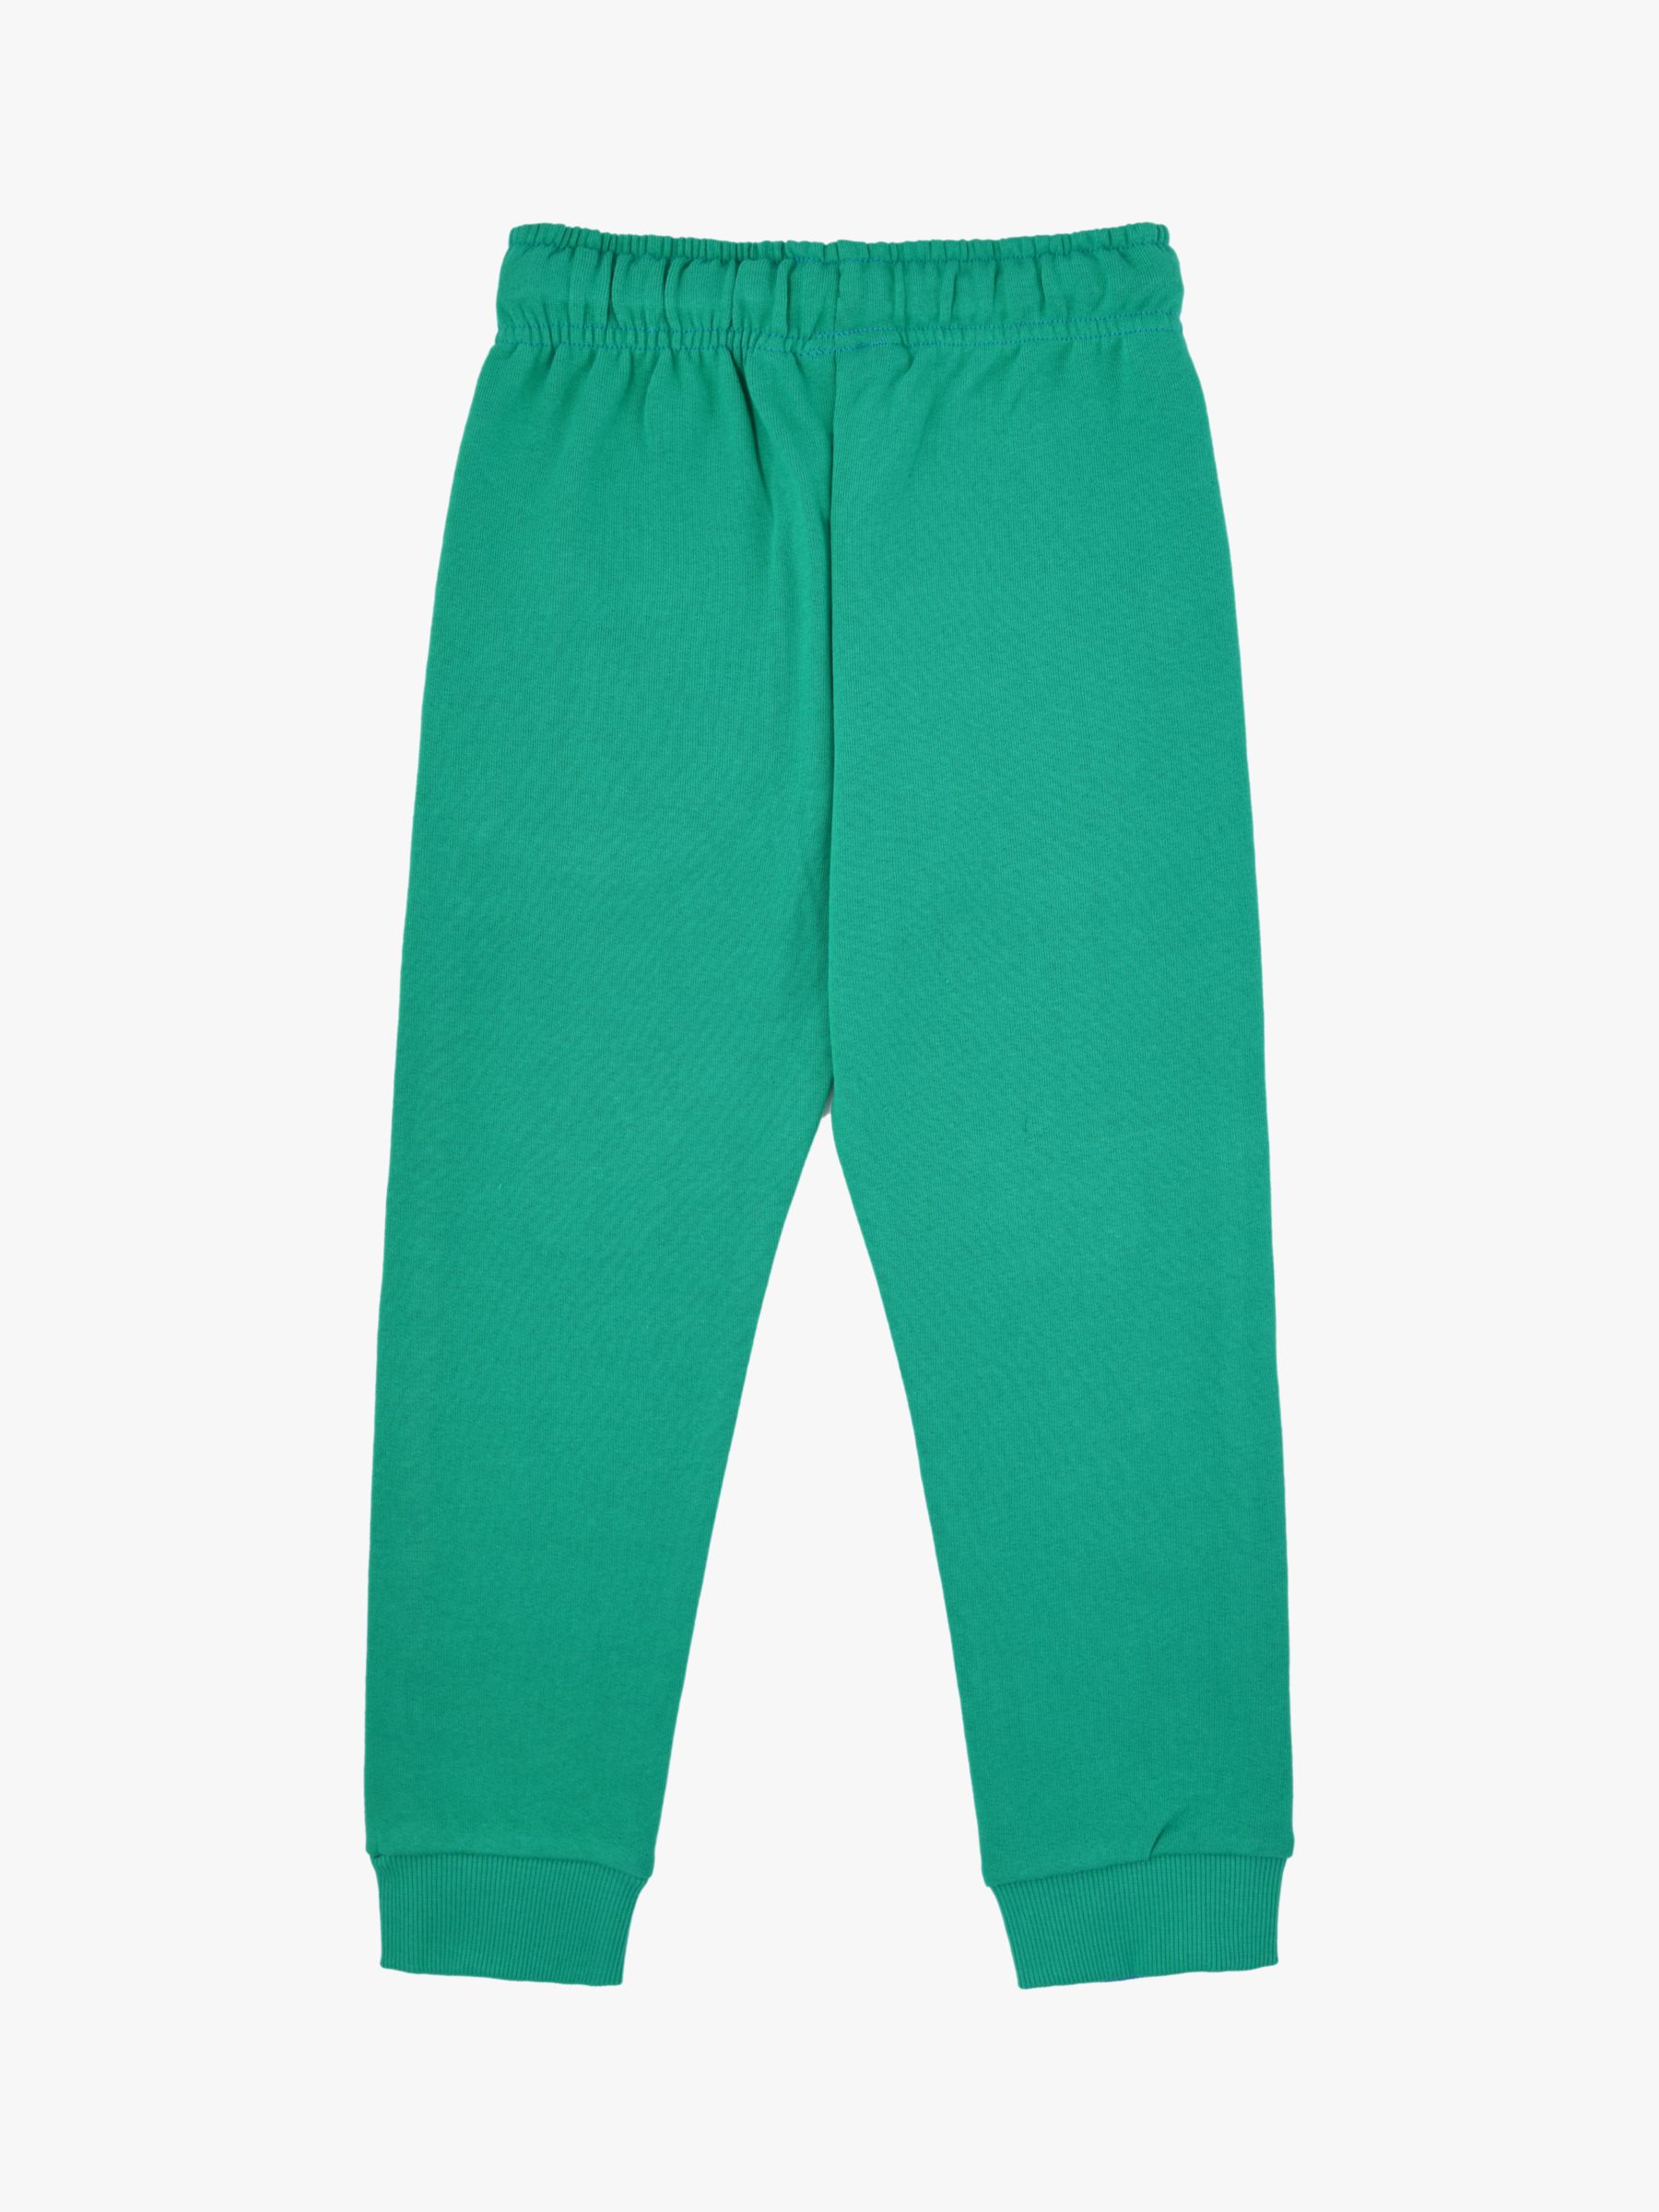 Buy Fabric Flavours Kids' Gruffalo Colour Block Joggers, Blue/Green Online at johnlewis.com